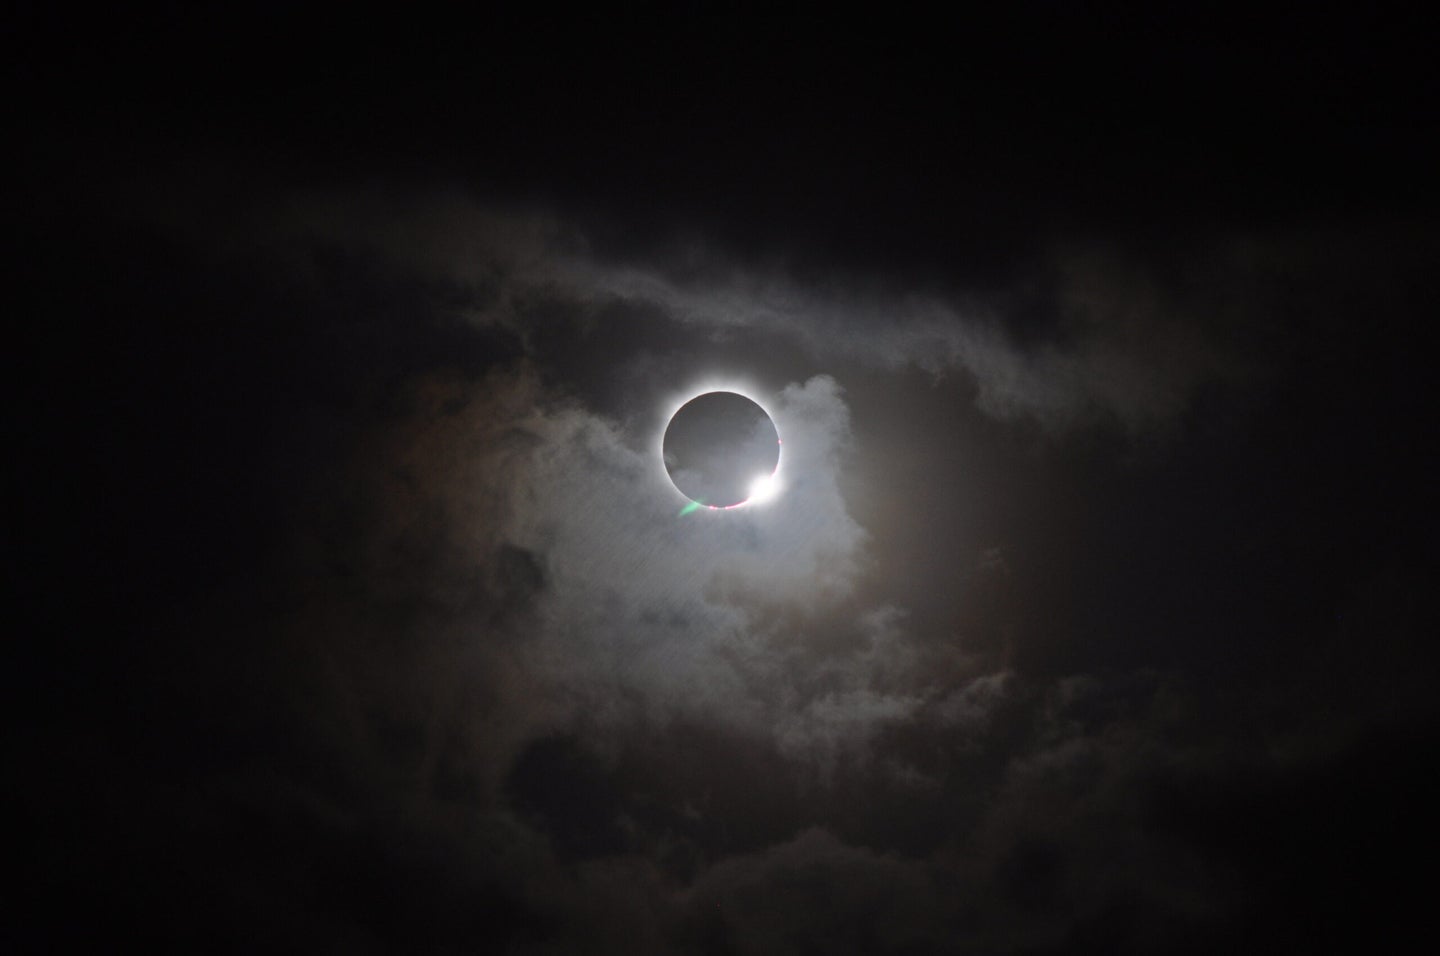 On Nov. 13, 2012, a narrow corridor in the southern hemisphere experienced a total solar eclipse.  The corridor lay mostly over the ocean but also cut across the northern tip of Australia where both professional and amateur astronomers gathered to watch.   During a solar eclipse one can see – using appropriate instruments to protect the eyes since you should never look at the sun directly – dim structures around the edges of the sun. These structures are the sun's atmosphere, the corona, which extends beyond the more easily seen surface, known as the photosphere.   In modern times, we know that the corona is constantly on the move. Made of electrified gas, called plasma, the solar material dances in response to huge magnetic fields on the sun. Structural changes in these magnetic fields can also give rise to giant explosions of radiation called solar flares, or expulsions of solar material called coronal mass ejections, CMEs – which make the corona a particularly interesting area to study. Photos courtesy of Romeo Durscher NASA image use policy. NASA Goddard Space Flight Center enables NASA’s mission through four scientific endeavors: Earth Science, Heliophysics, Solar System Exploration, and Astrophysics. Goddard plays a leading role in NASA’s accomplishments by contributing compelling scientific knowledge to advance the Agency’s mission. Follow us on Twitter Like us on Facebook Find us on Instagram